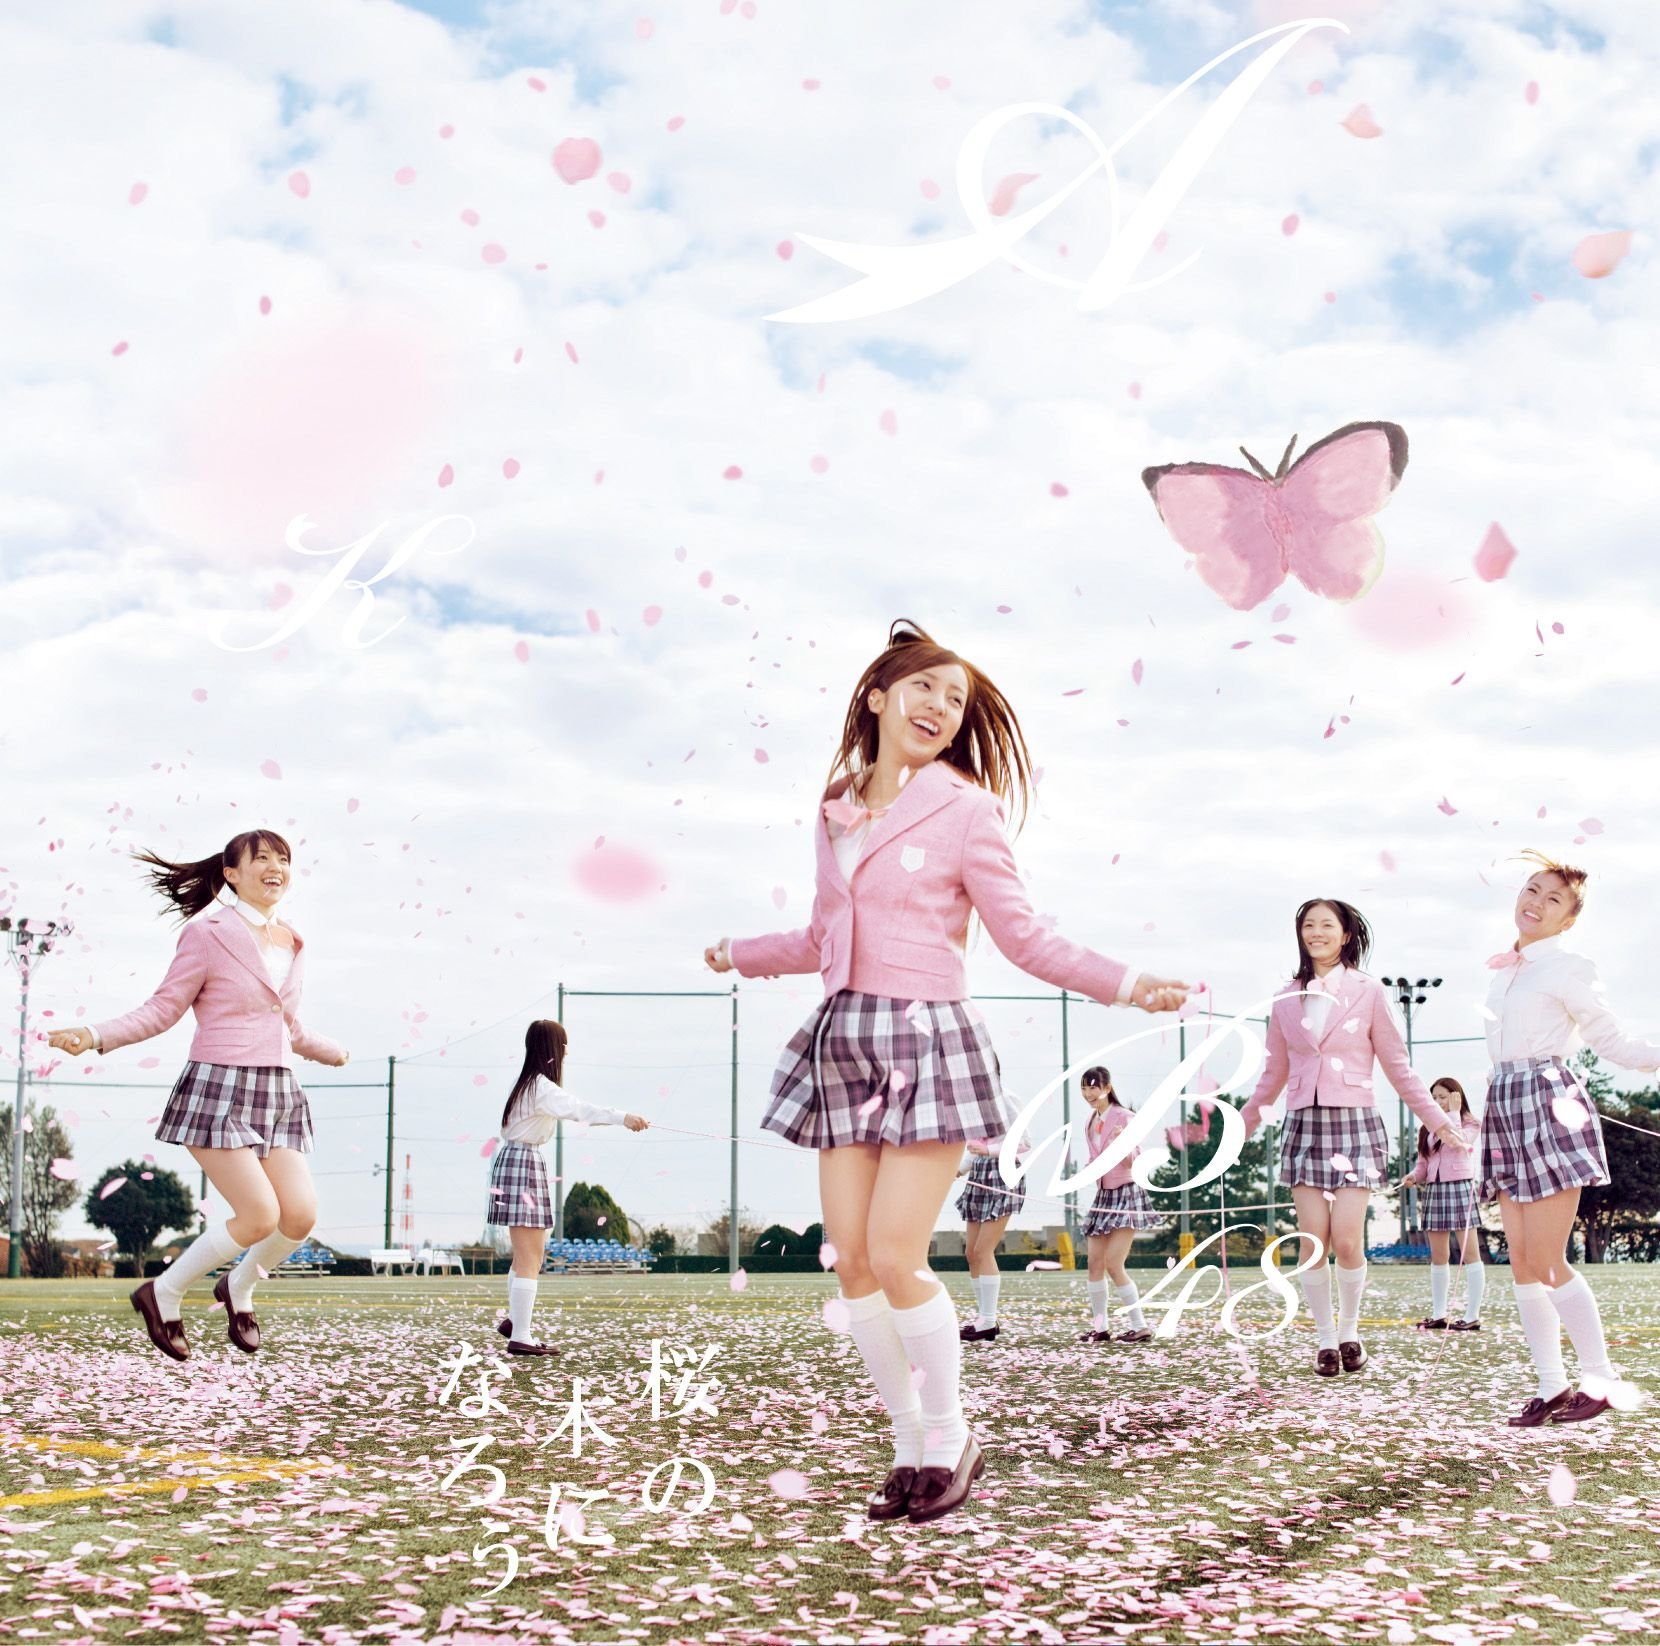 The title of AKB48’s new song will be “So long !”